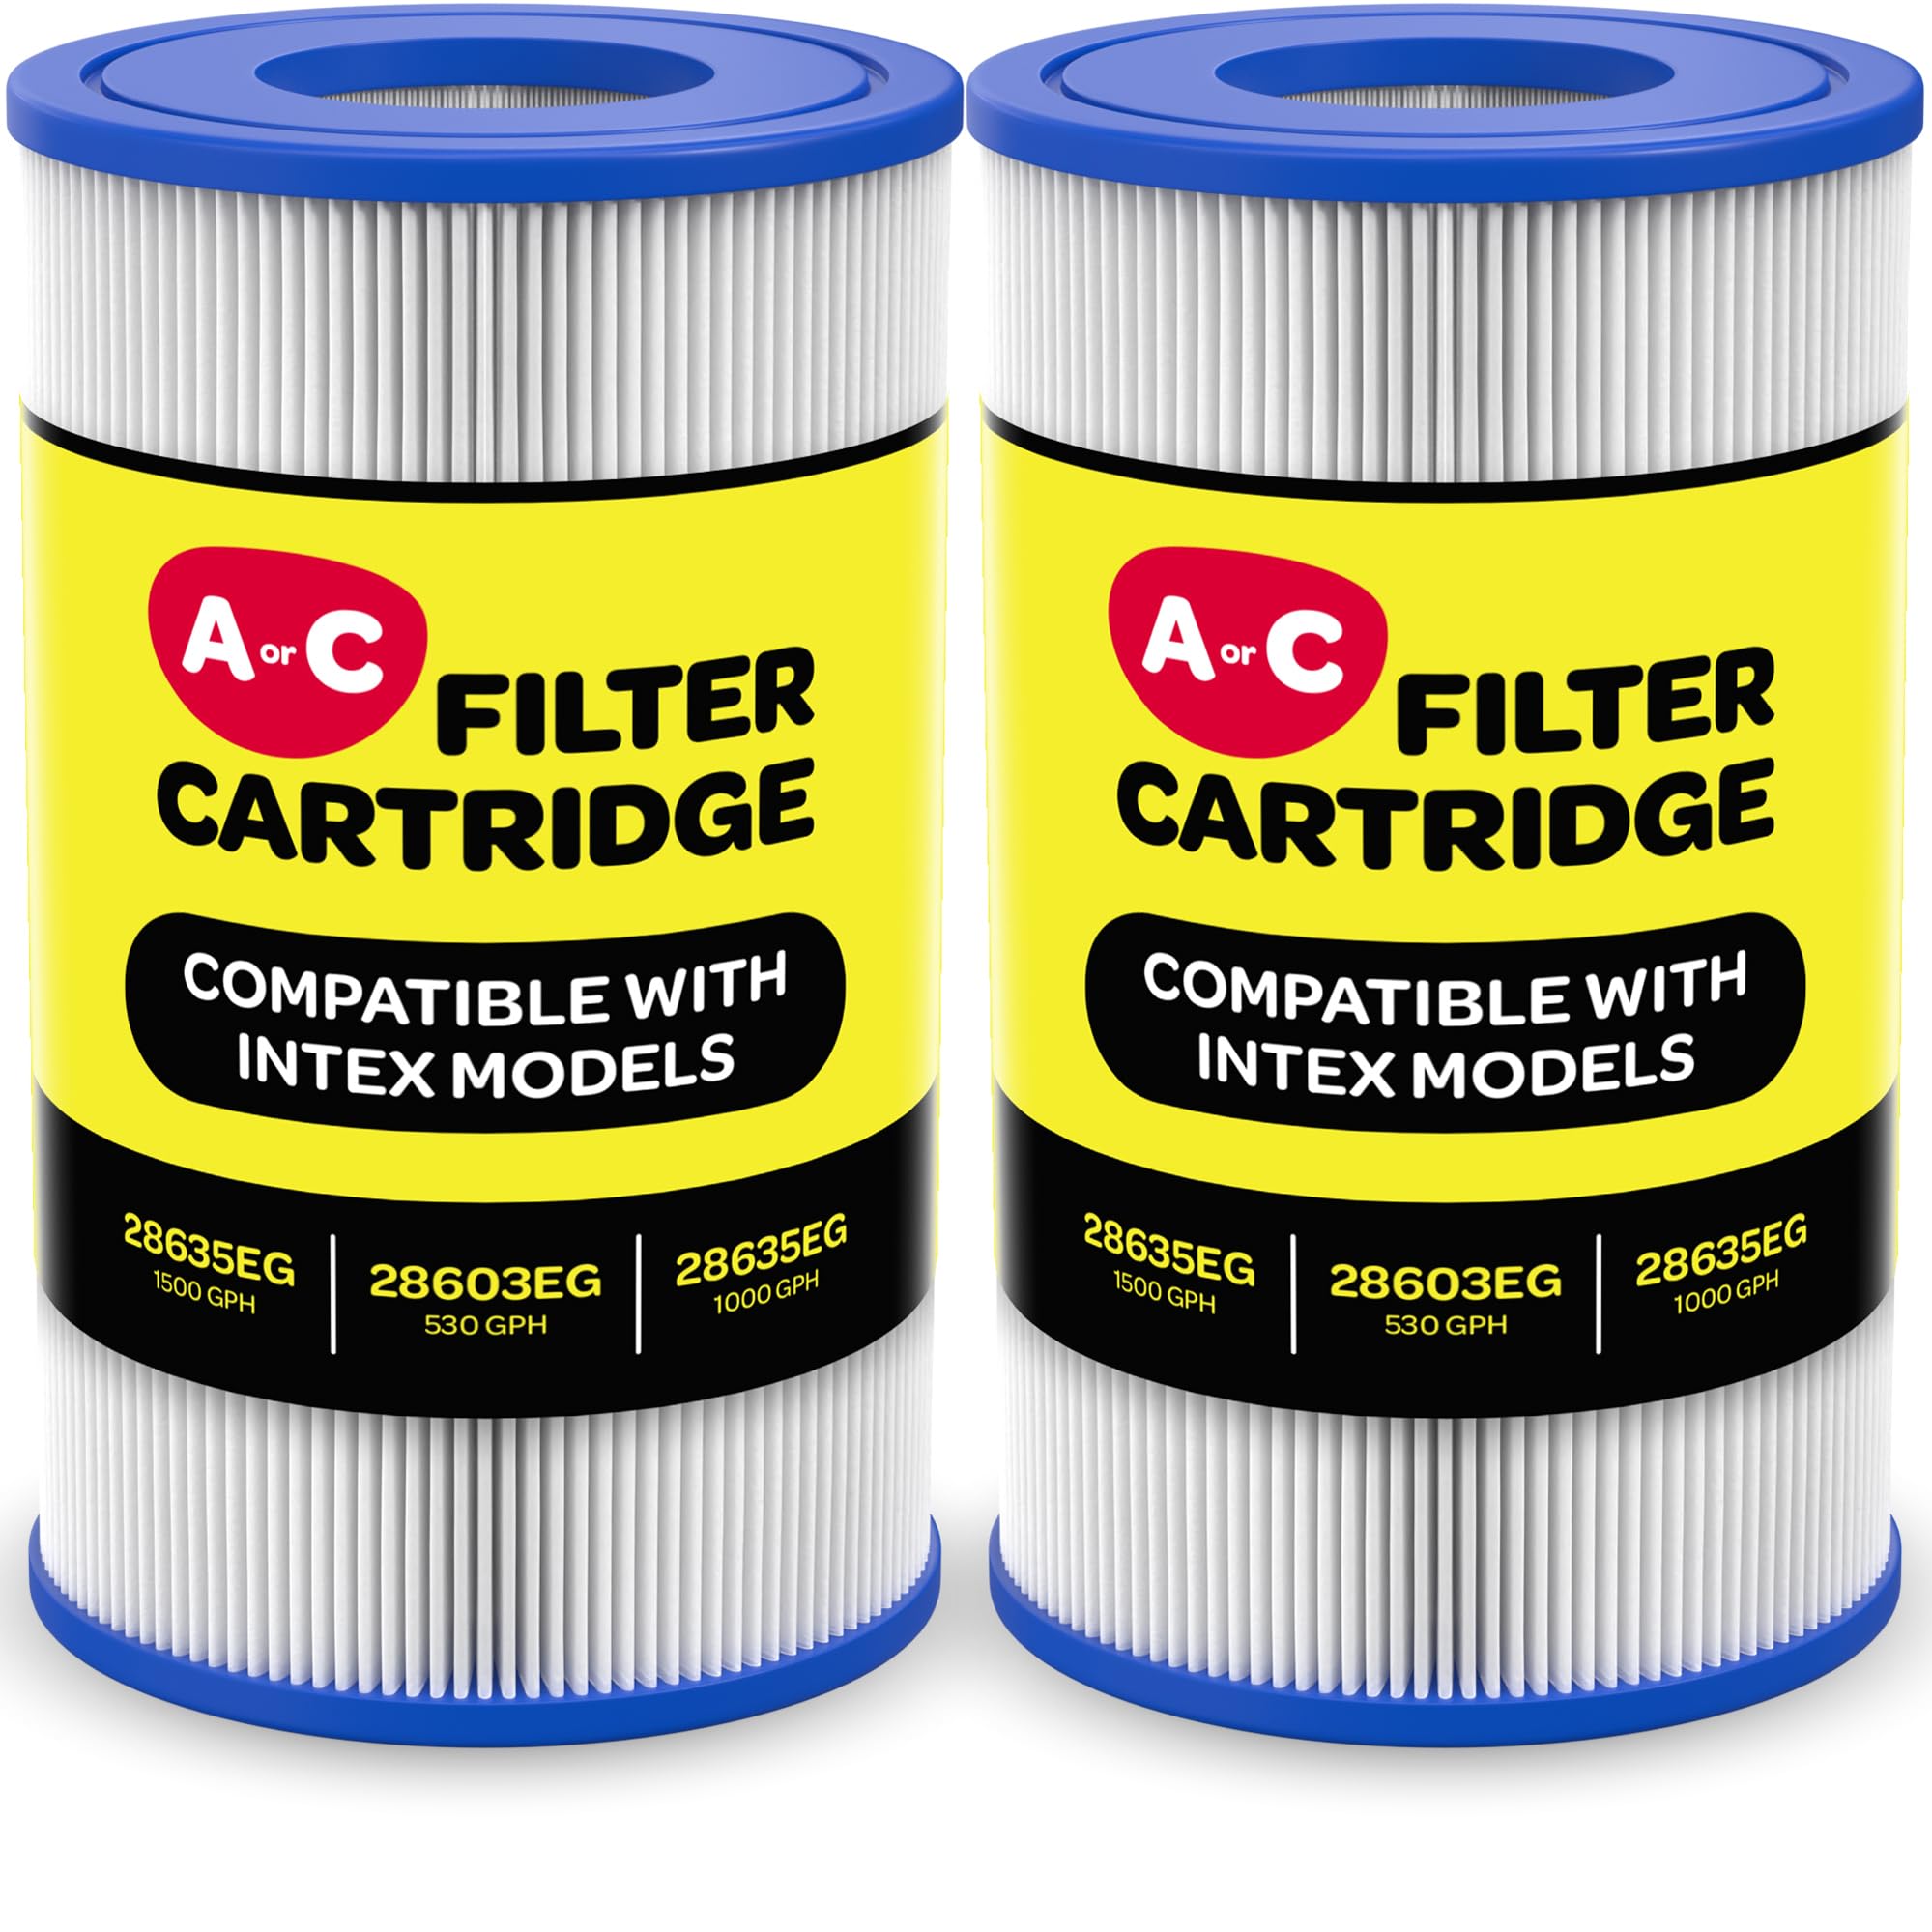 Filters type a or c, hot tub filter,  - Like New